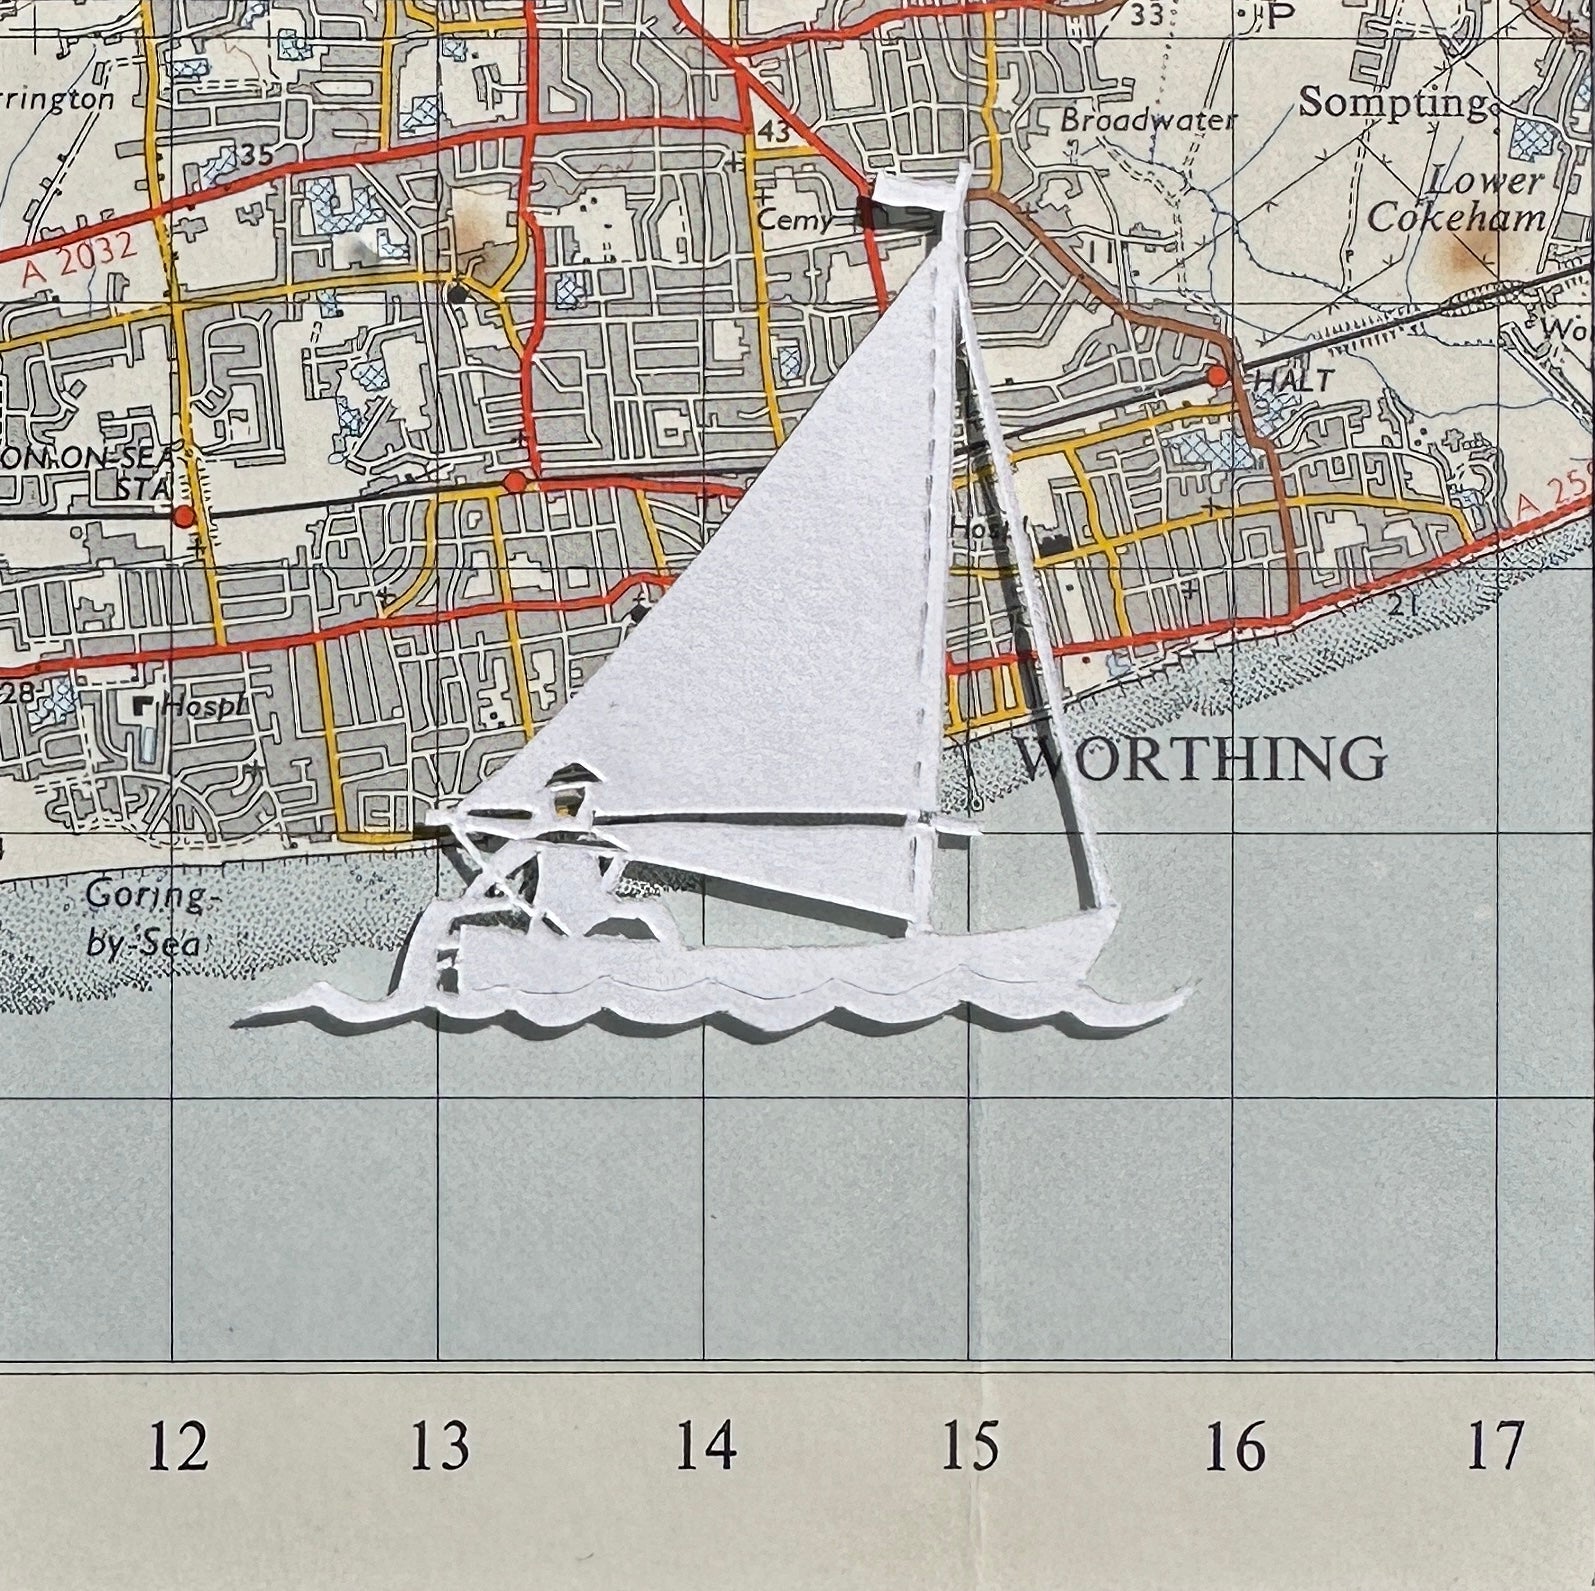 papercut sailing boat over OS map extract